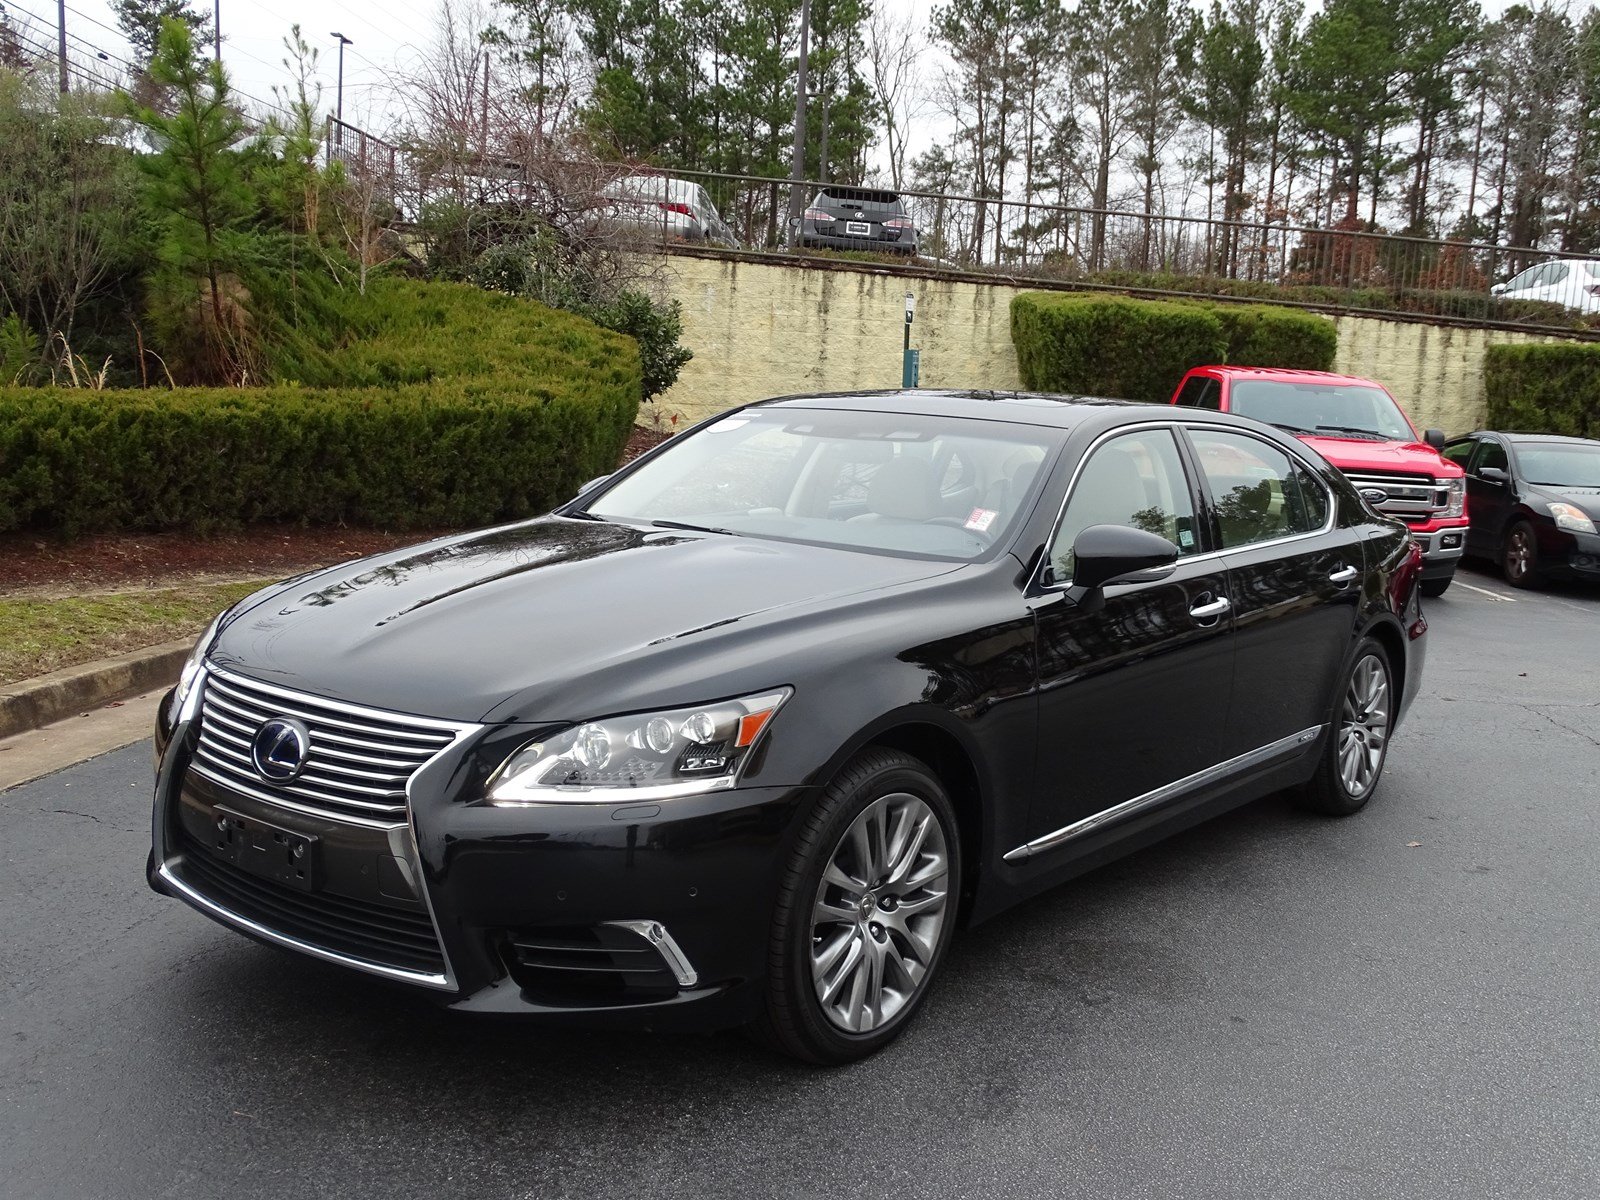 Certified PreOwned 2015 Lexus LS 600h L 600h L 4dr Car in